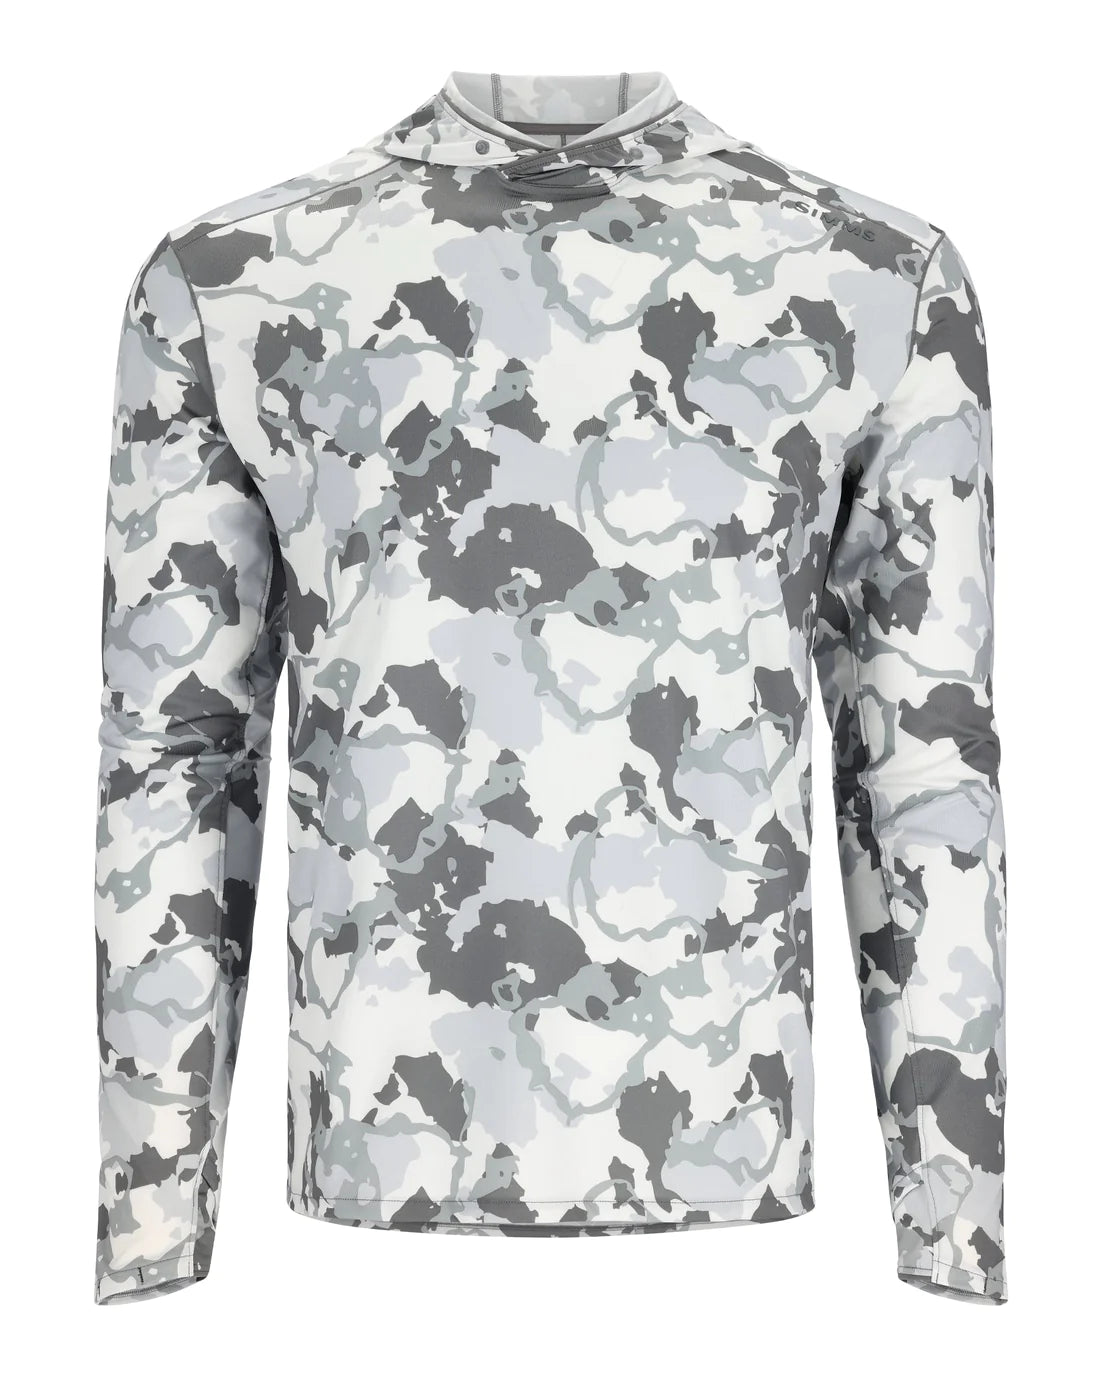 Simms Solarflex Hoody - LARGE / REGIMENT CAMO CINDER - Mansfield Hunting & Fishing - Products to prepare for Corona Virus